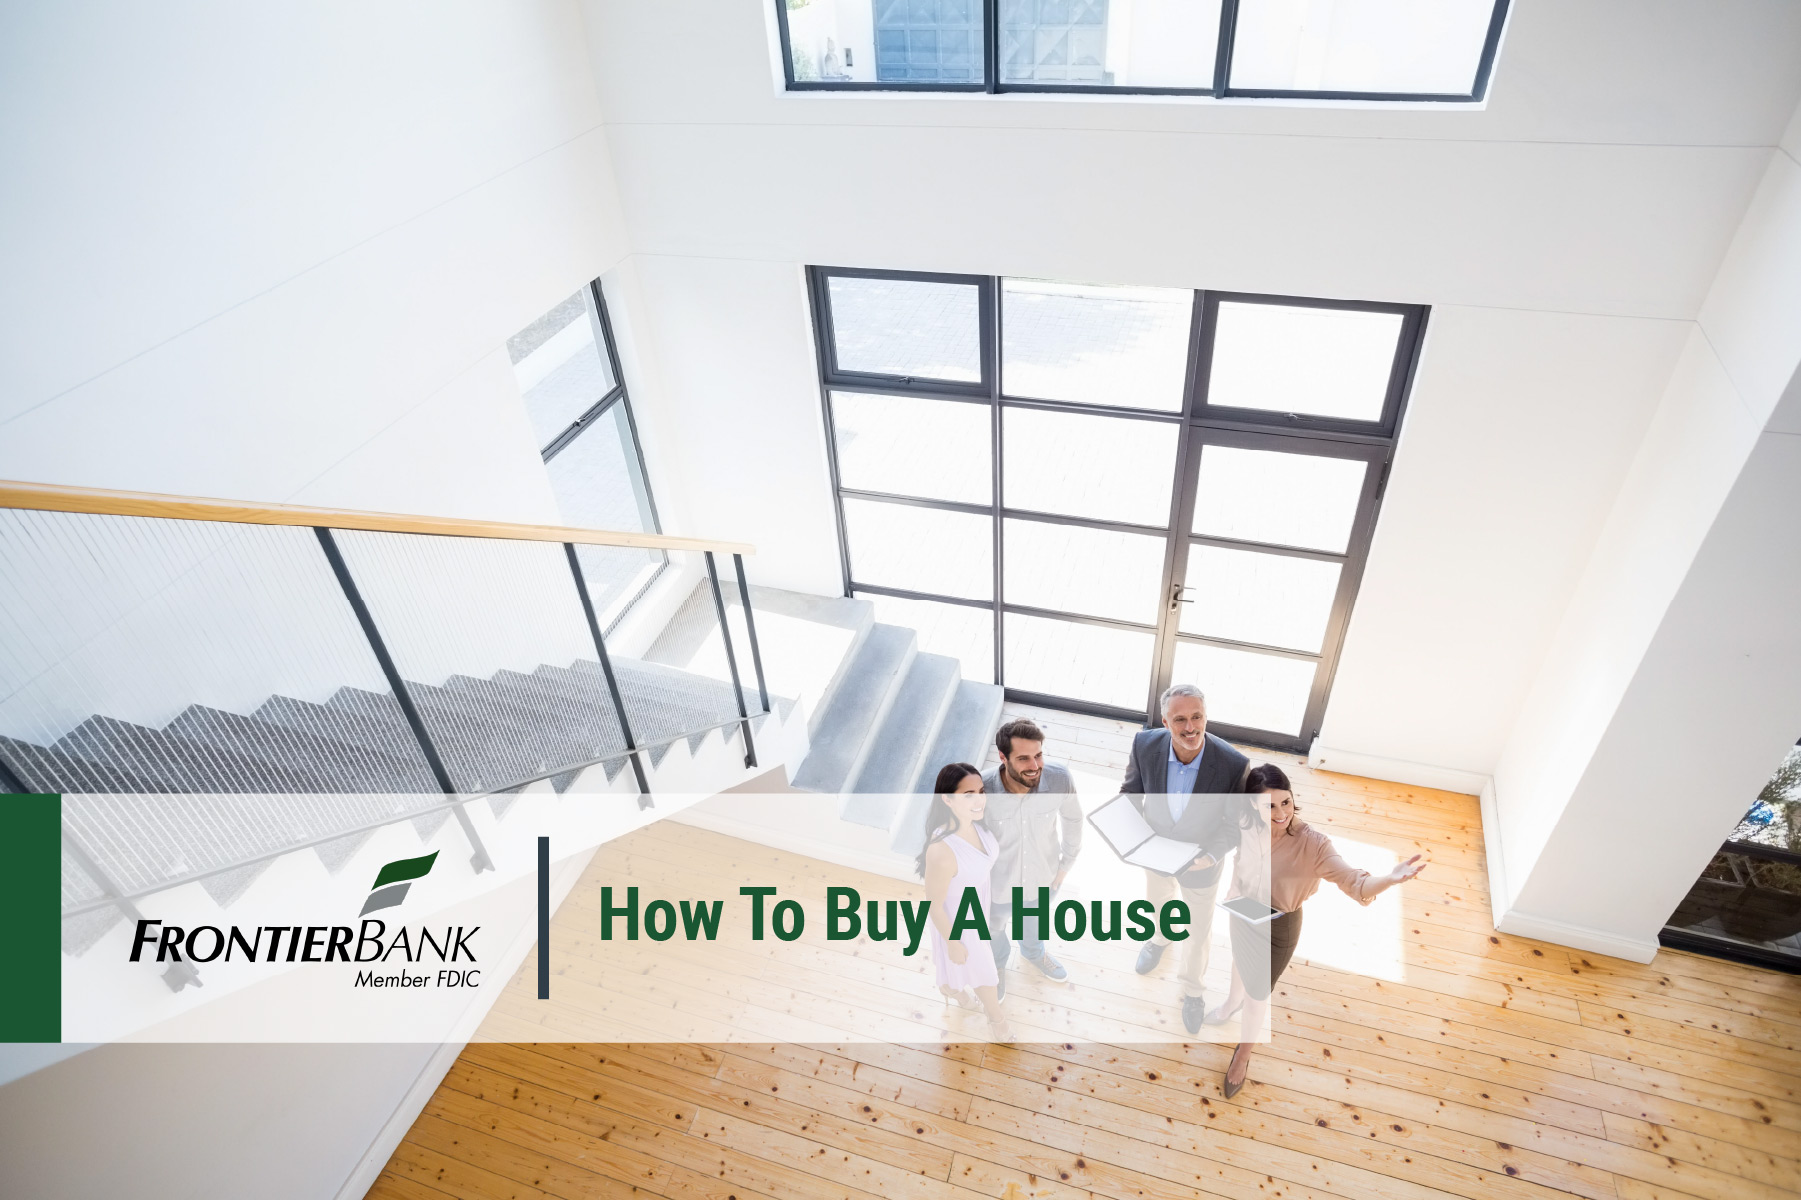 How to Buy a House part 2